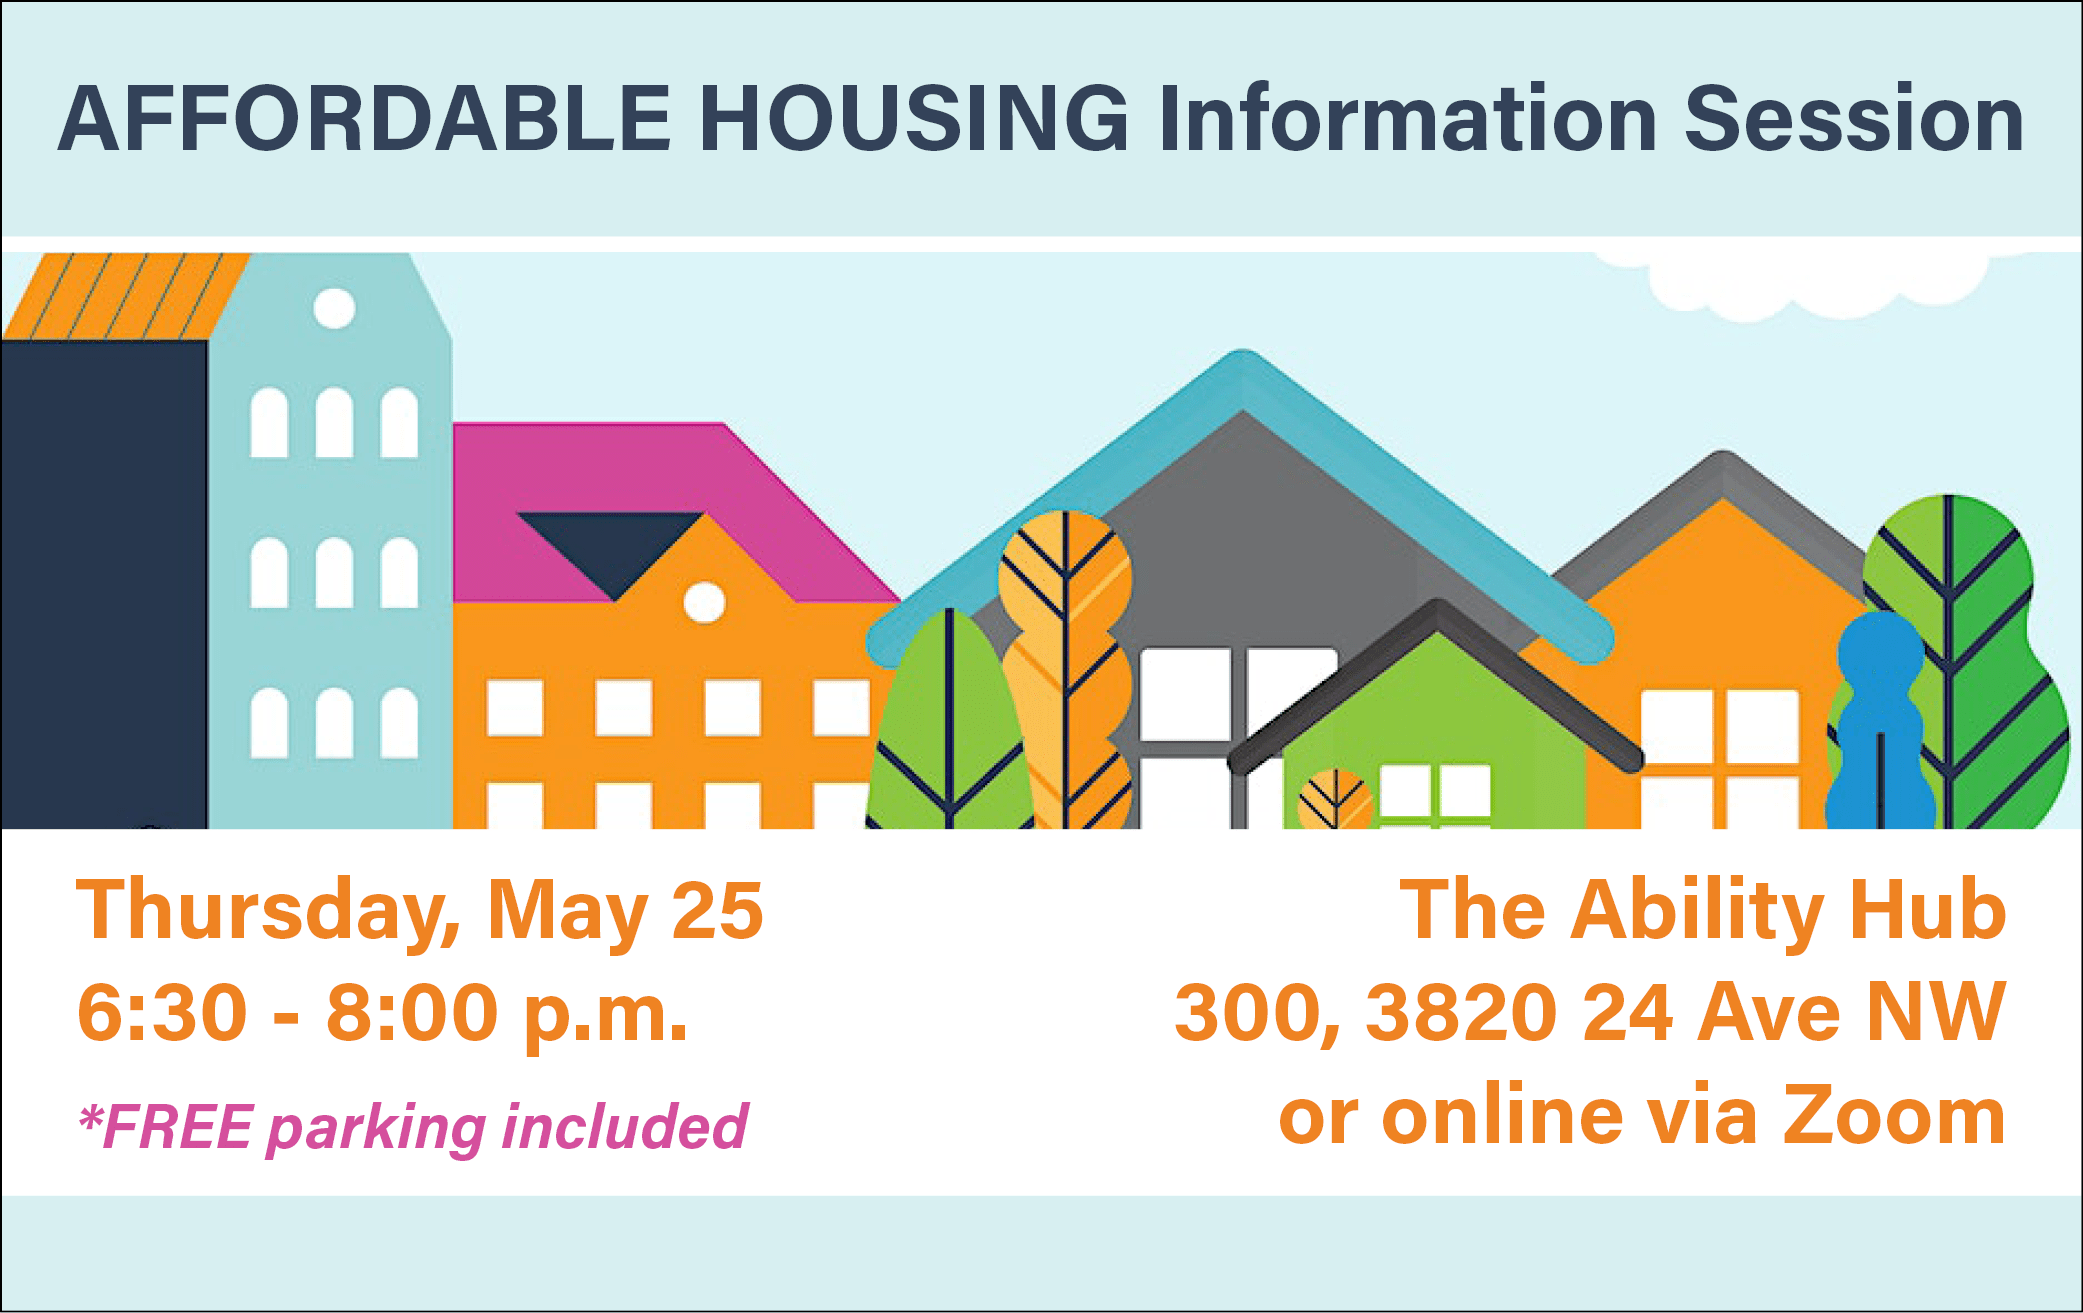 Alberta Housing Network, Affordable Housing Information Session